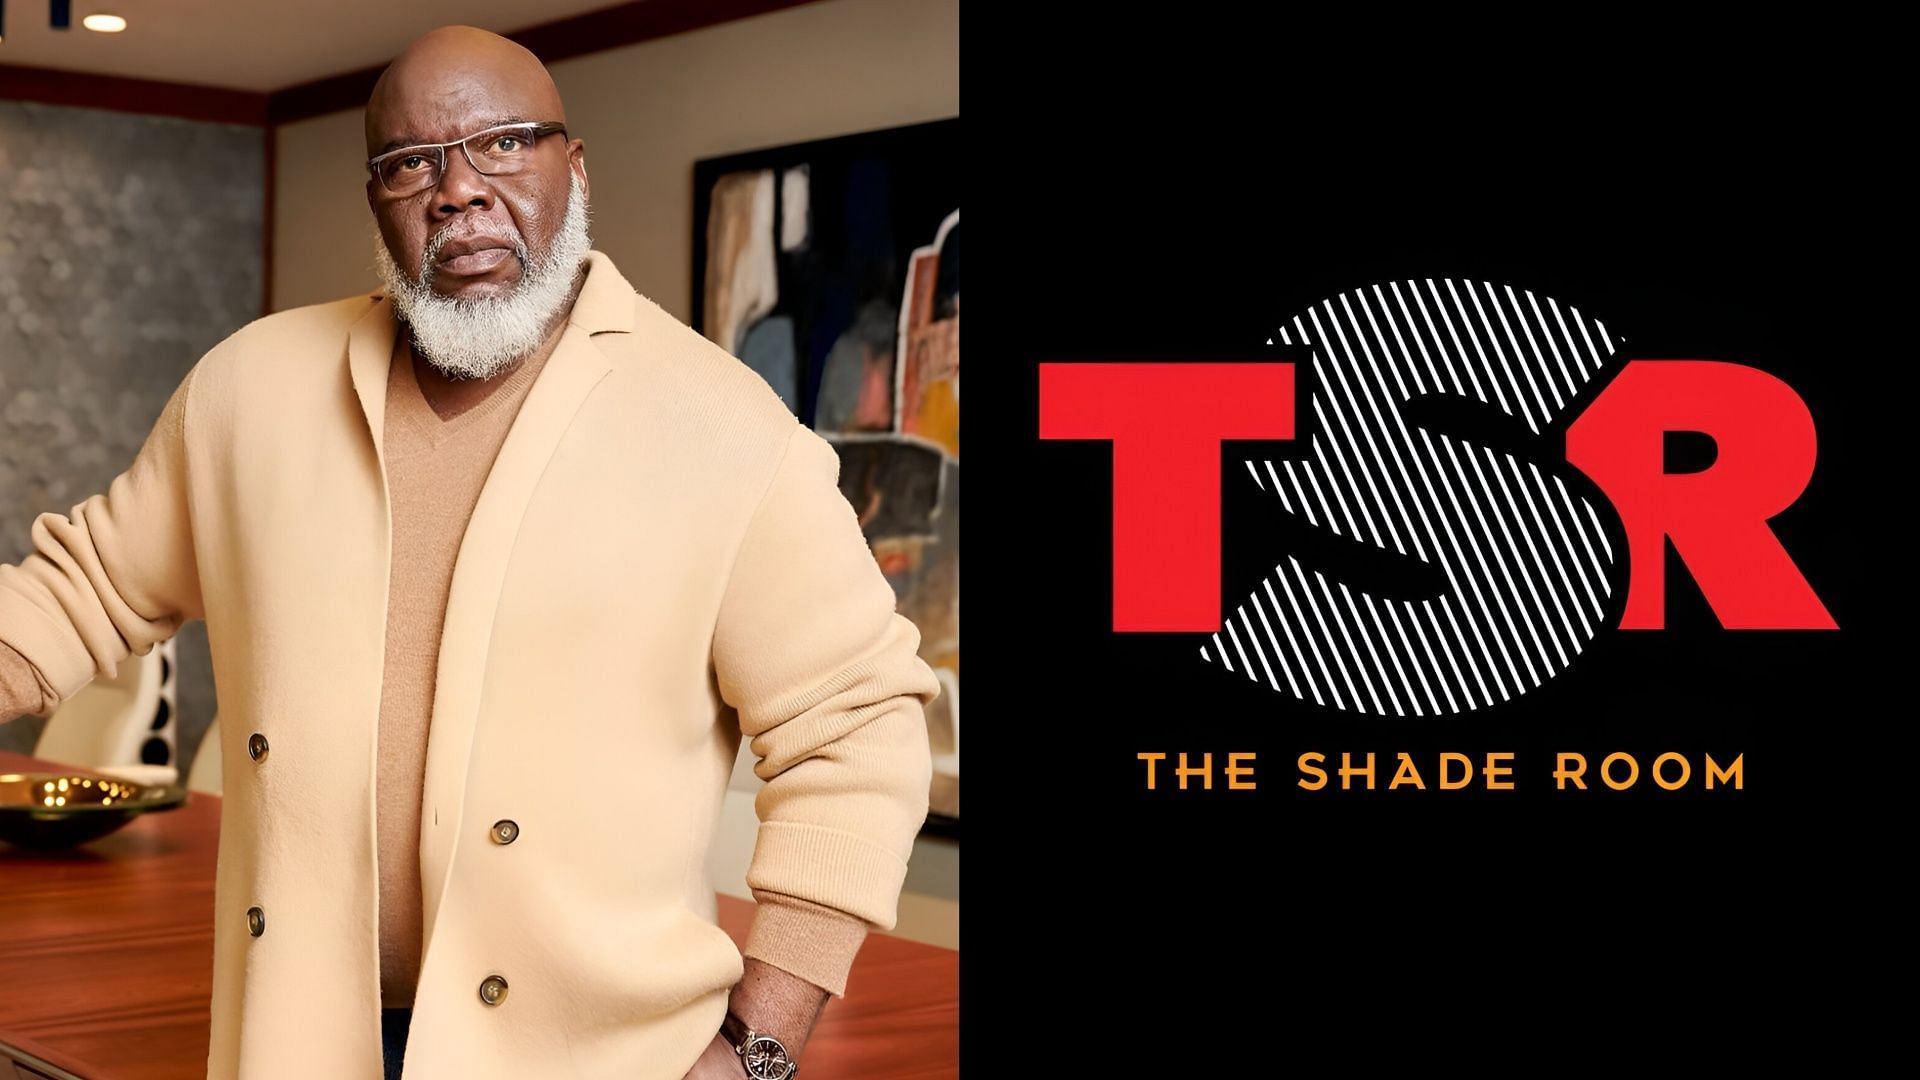 Viral claim about TD Jakes owning The Shade Room has been debunked. (Image via Instagram/@bishopjakes, Facebook/The Shade Room)